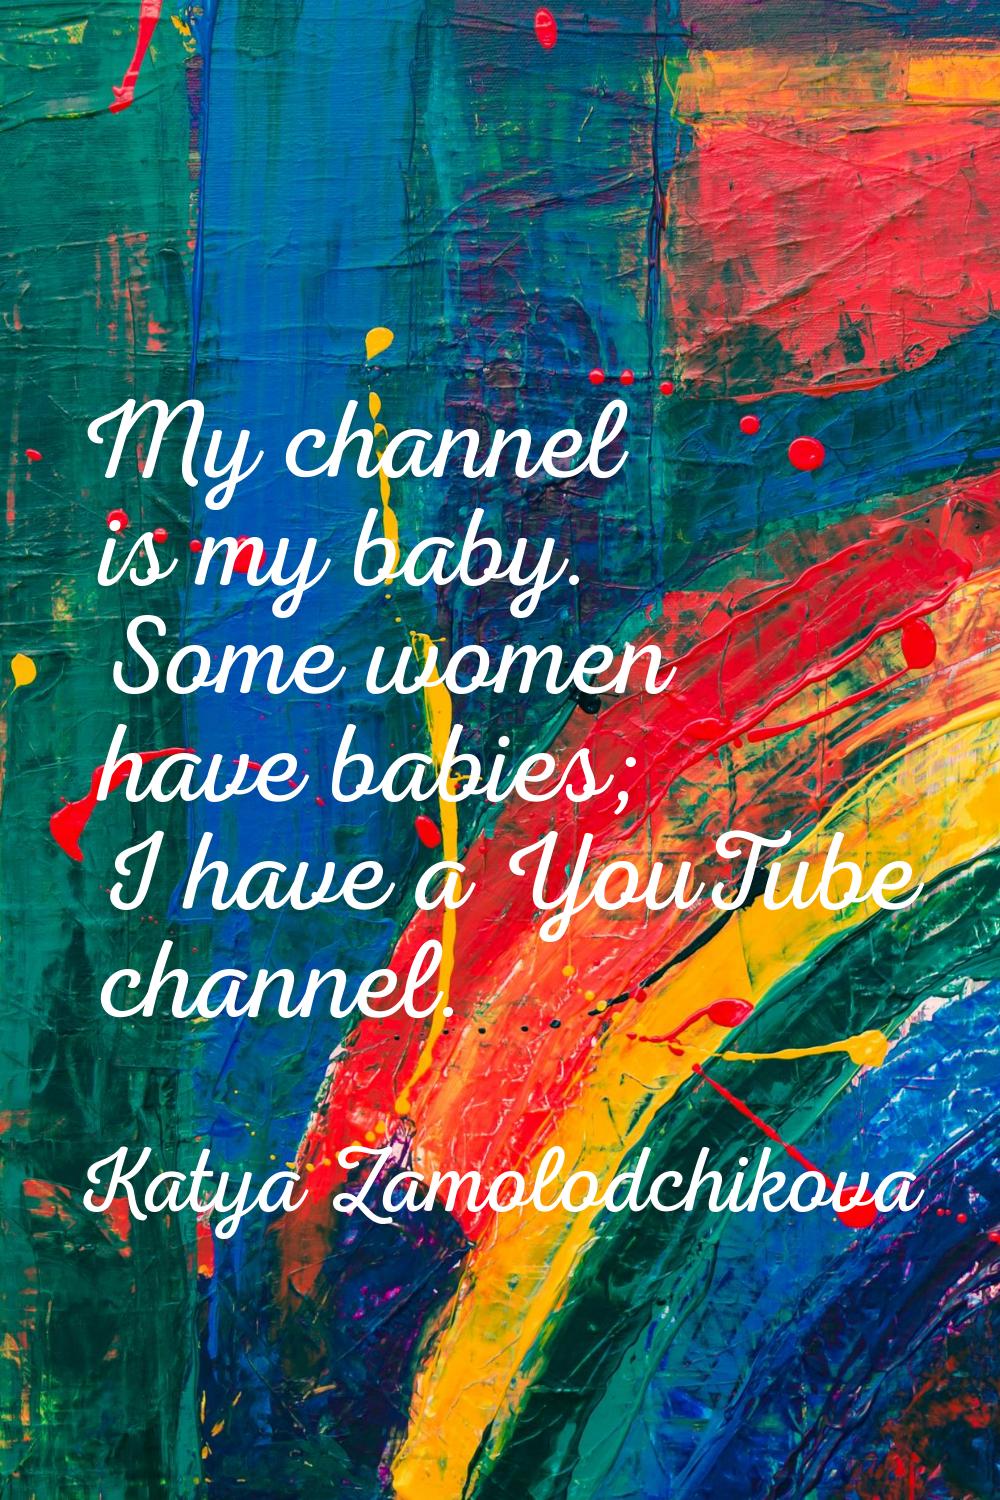 My channel is my baby. Some women have babies; I have a YouTube channel.